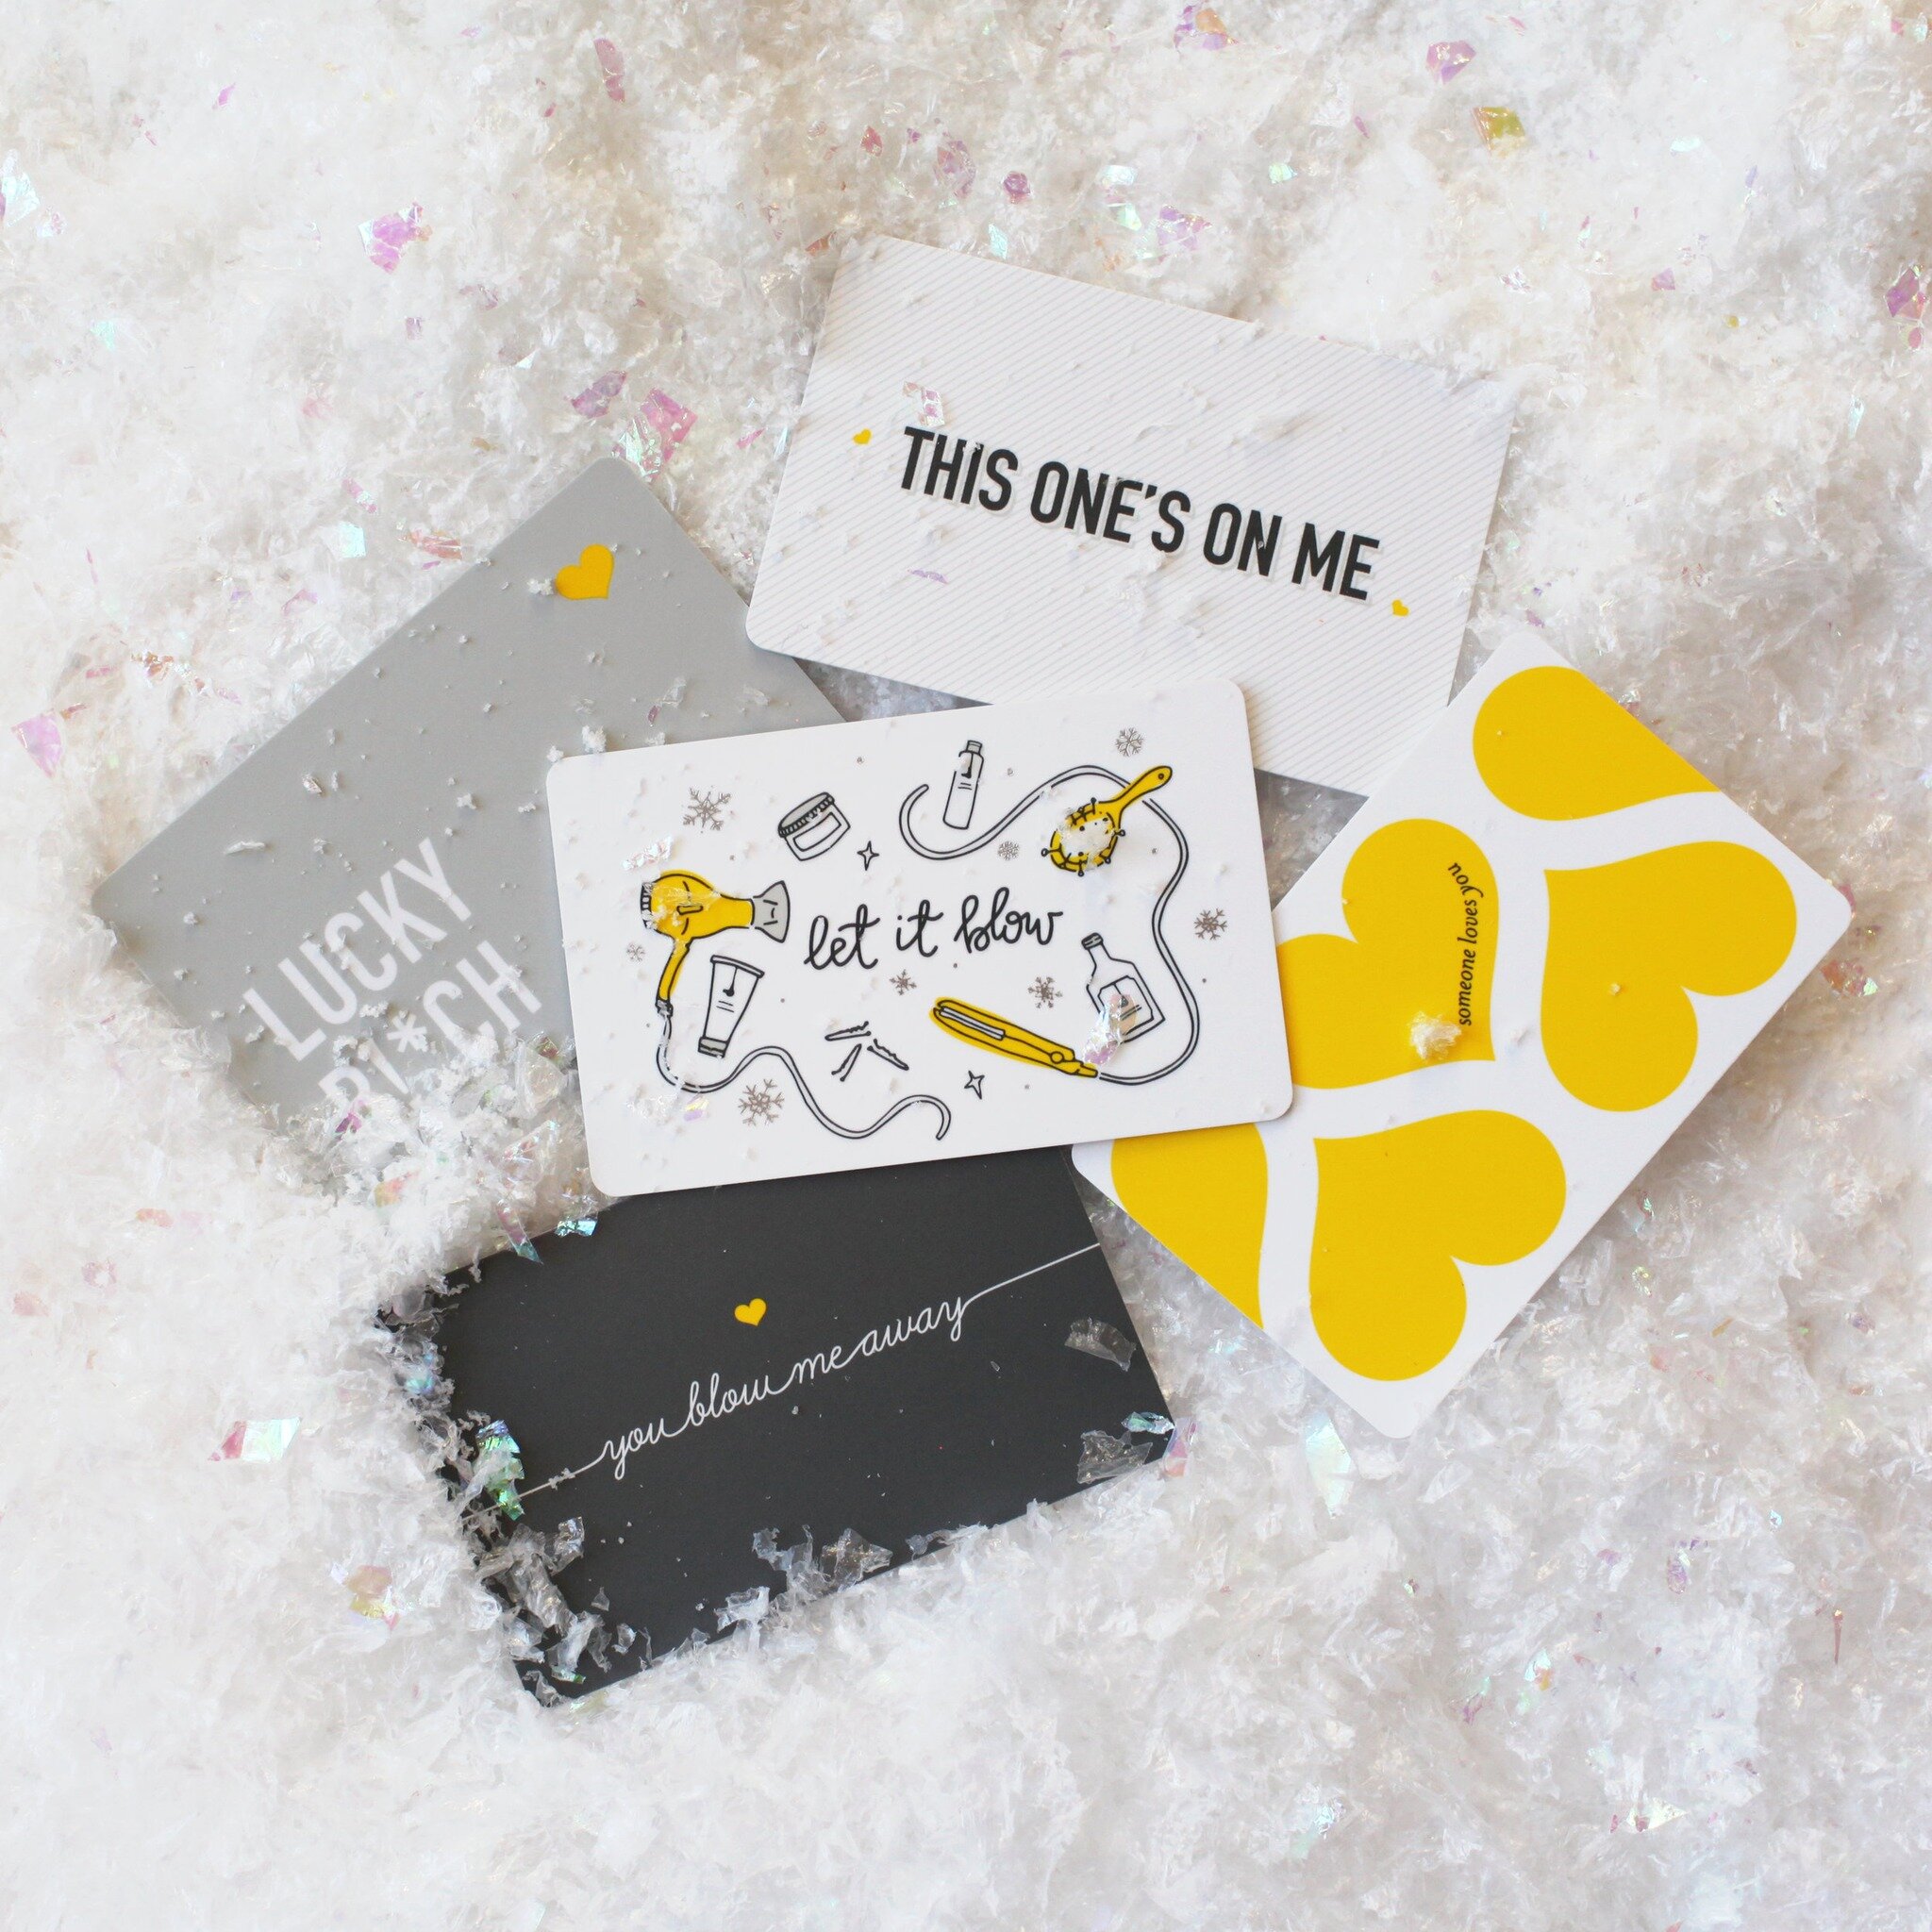 Give the gift of great hair! Gift cards to drybar are always the best! 💁🏼&zwj;♀️💛 Stop by and pick one up today! 

&bull;
&bull;
&bull;
&bull;
&bull;
#legacynorth #shopsatlegacynorth #shopsatlegacy #plano #planolife #planomoms #planofoodies #dalla